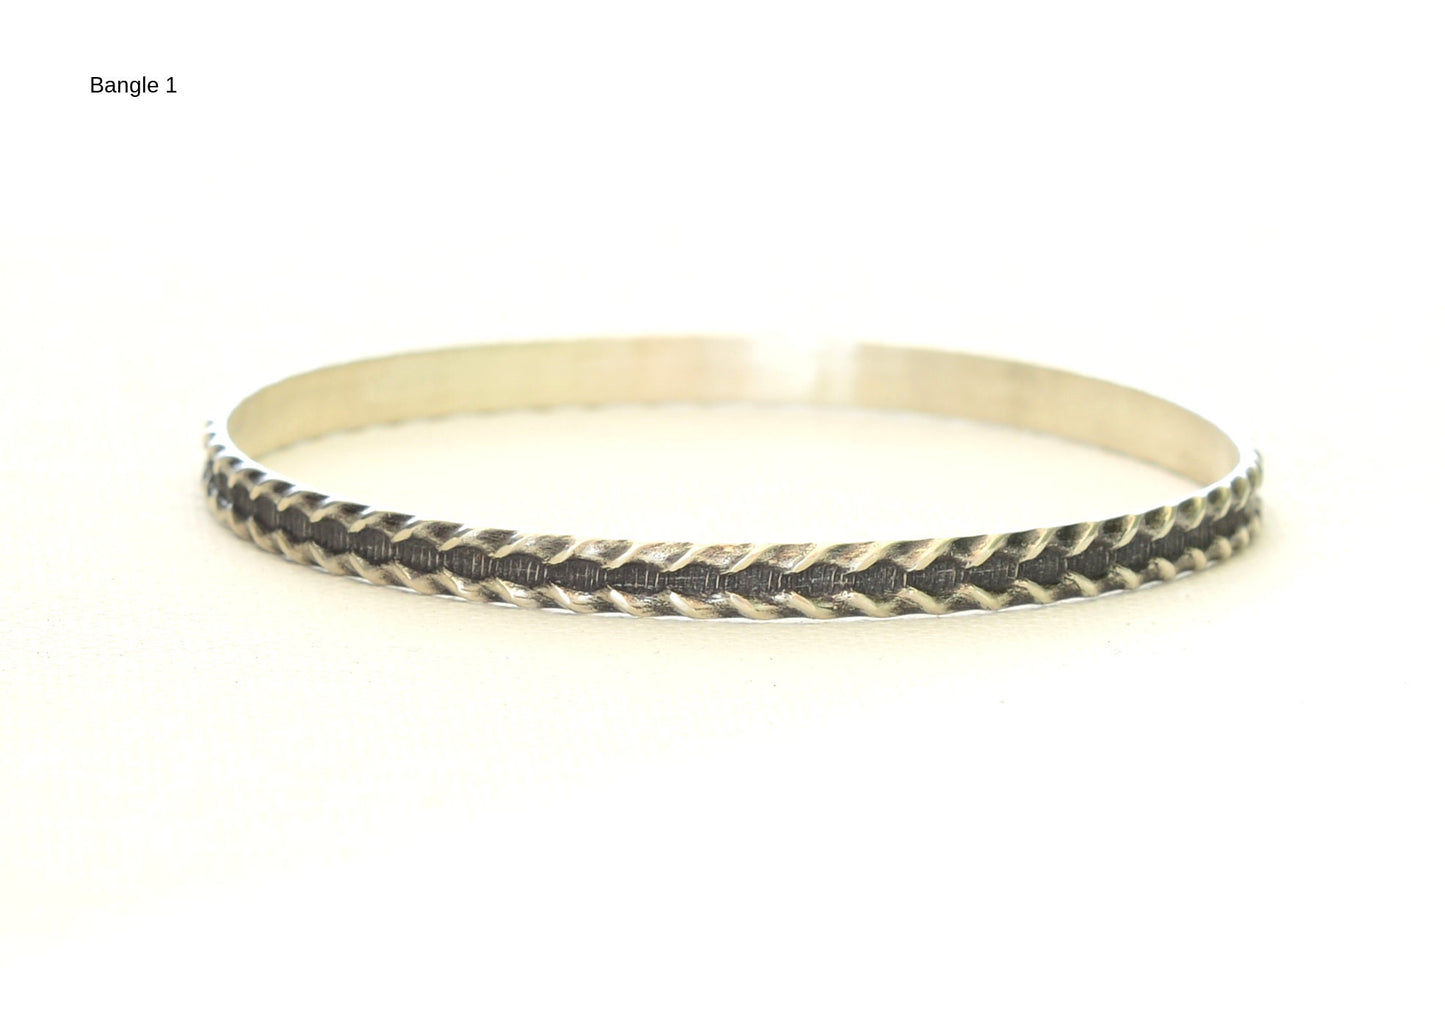 Stacking Bangle Set in Sterling Silver with floral patterning